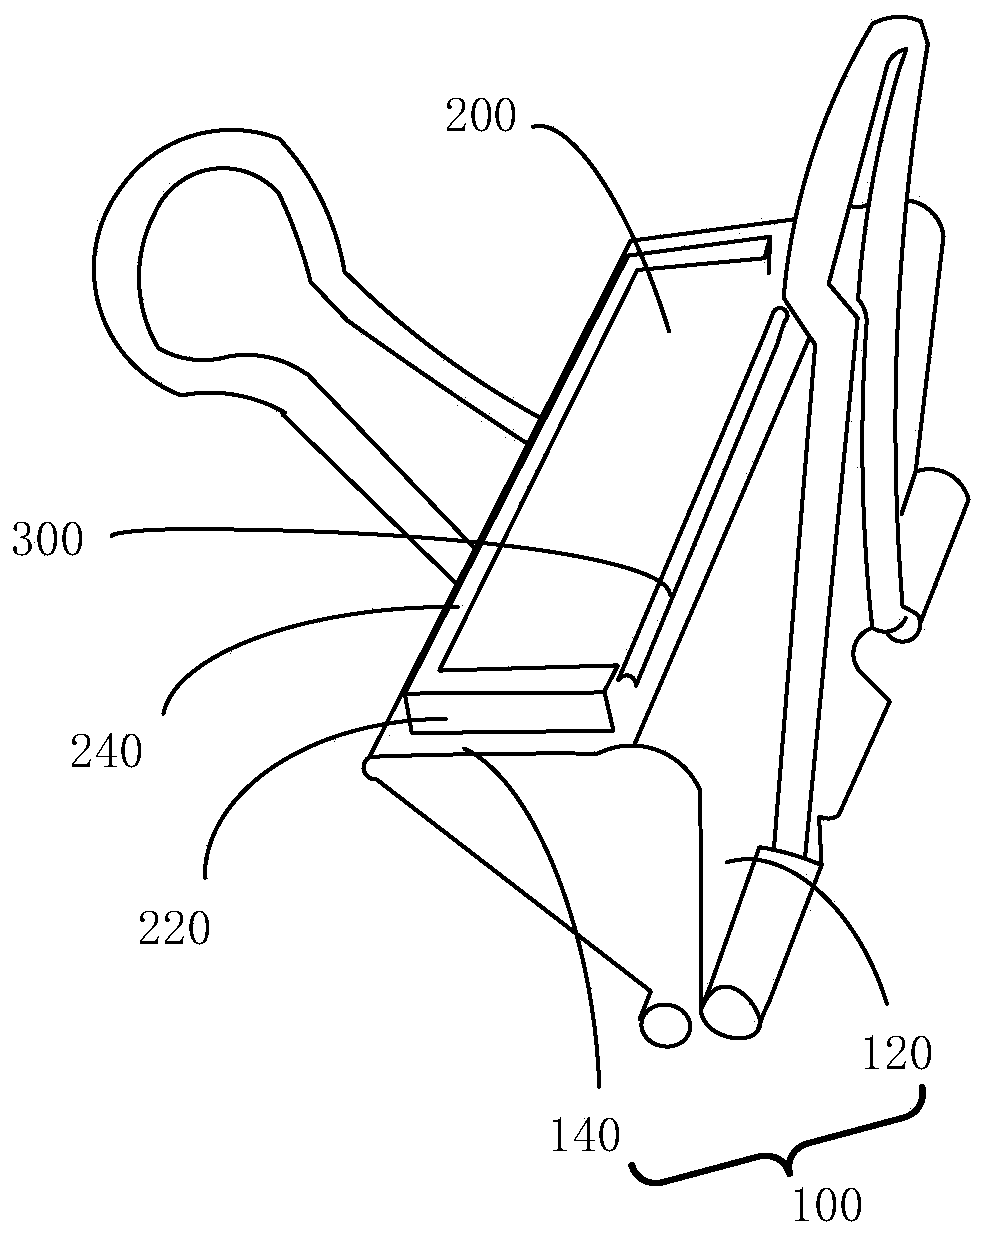 Long-tail clamp